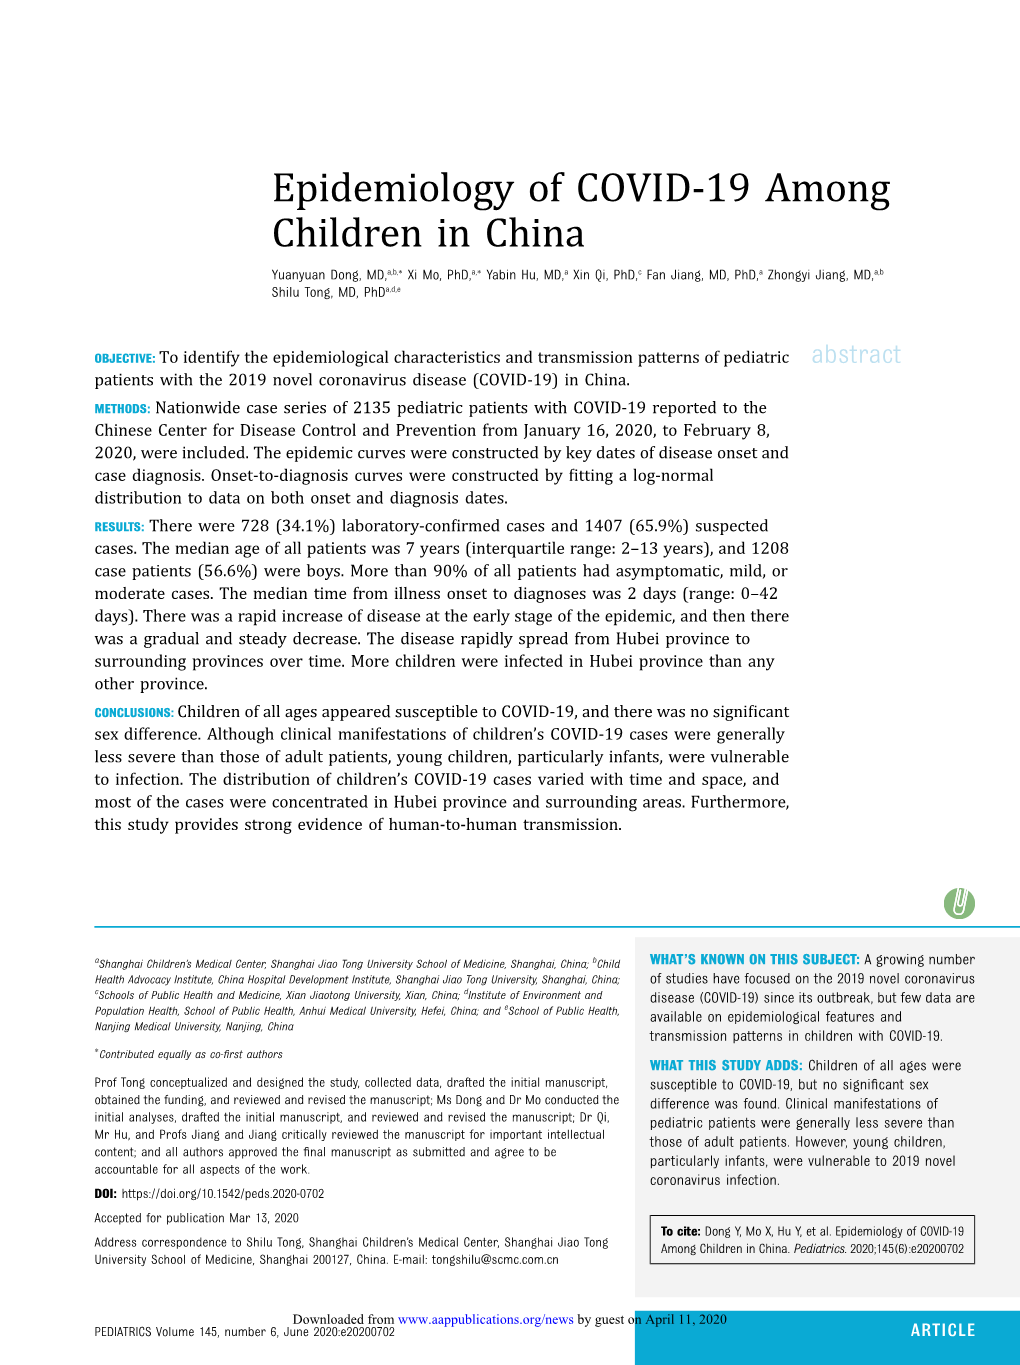 Epidemiology of COVID-19 Among Children in China